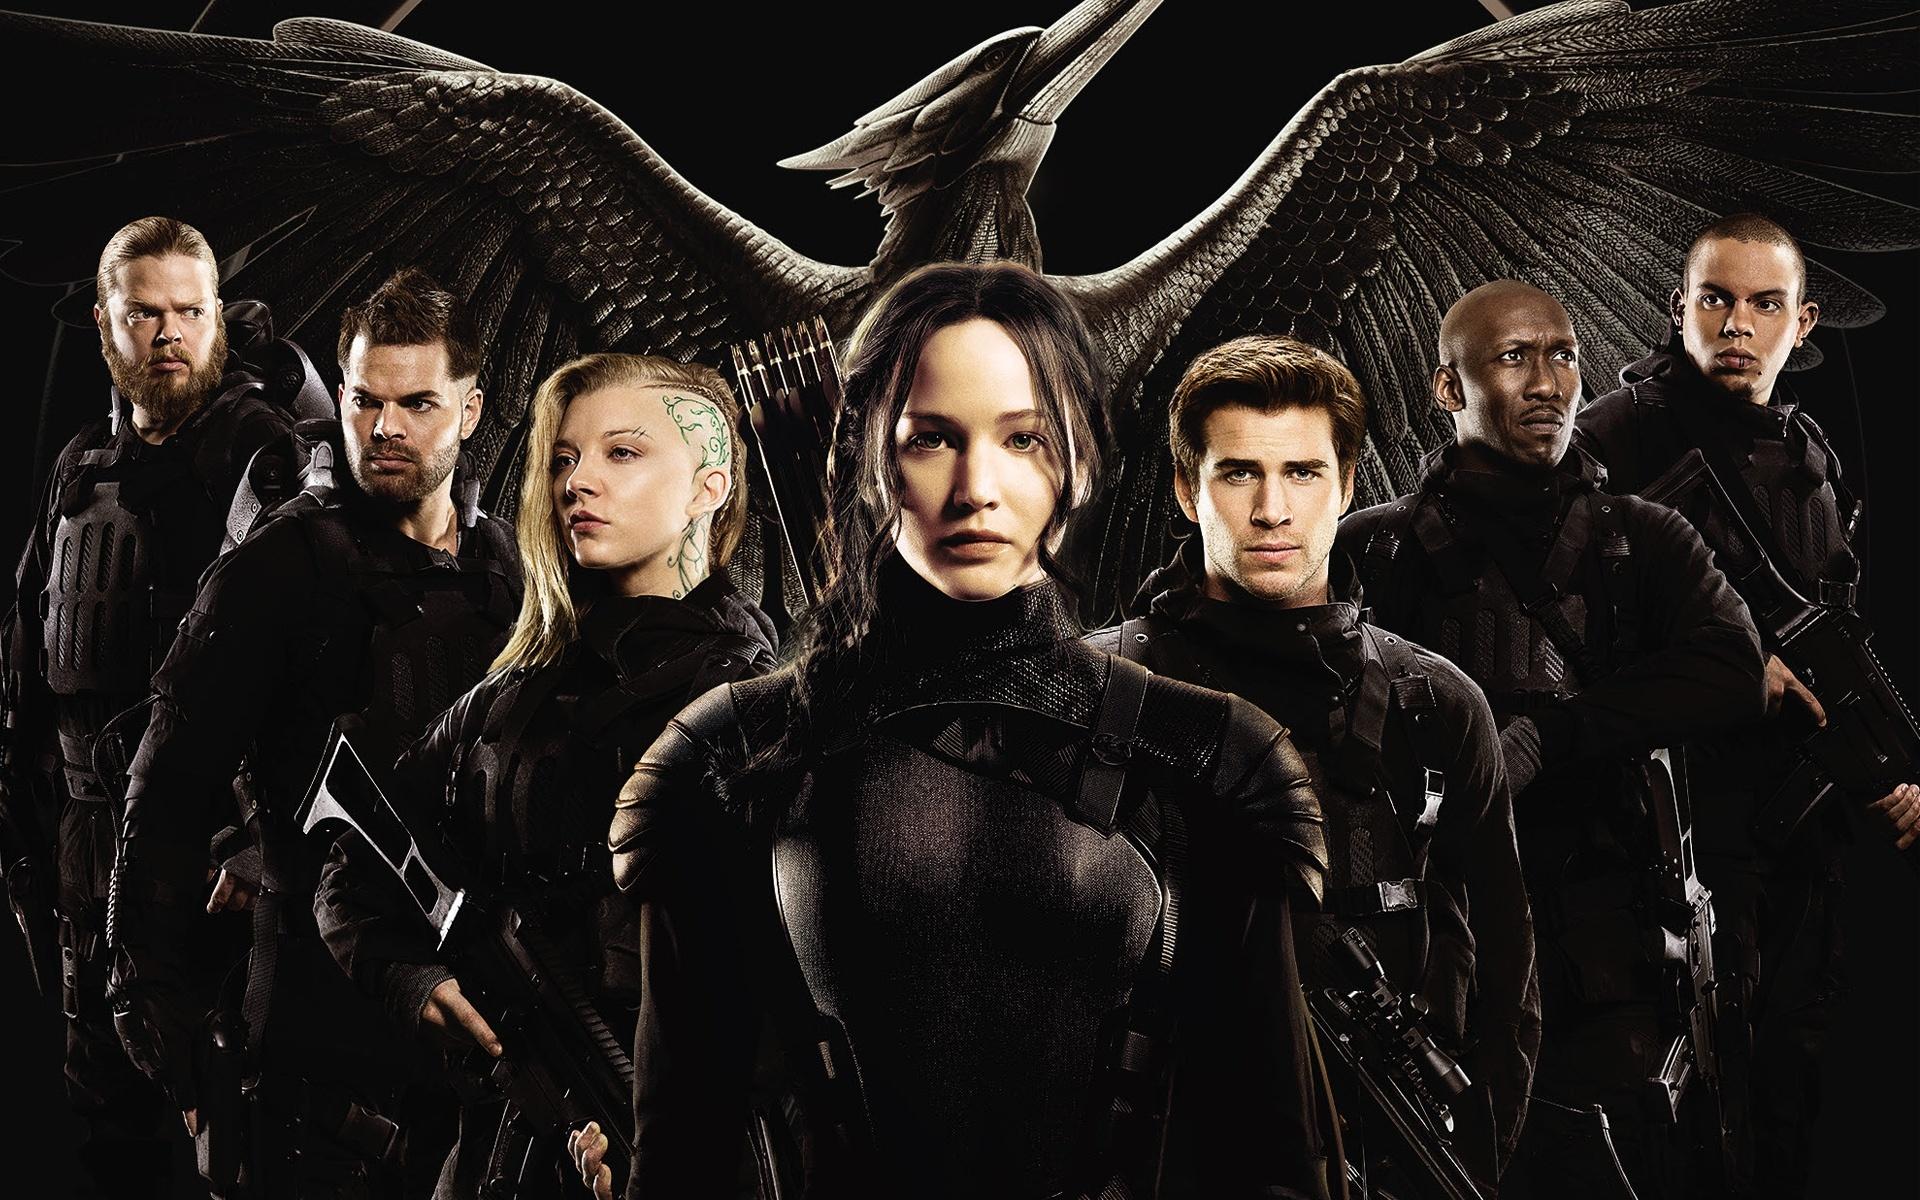 The Hunger Games: Mockingjay Part 2 HD Wallpaper download free